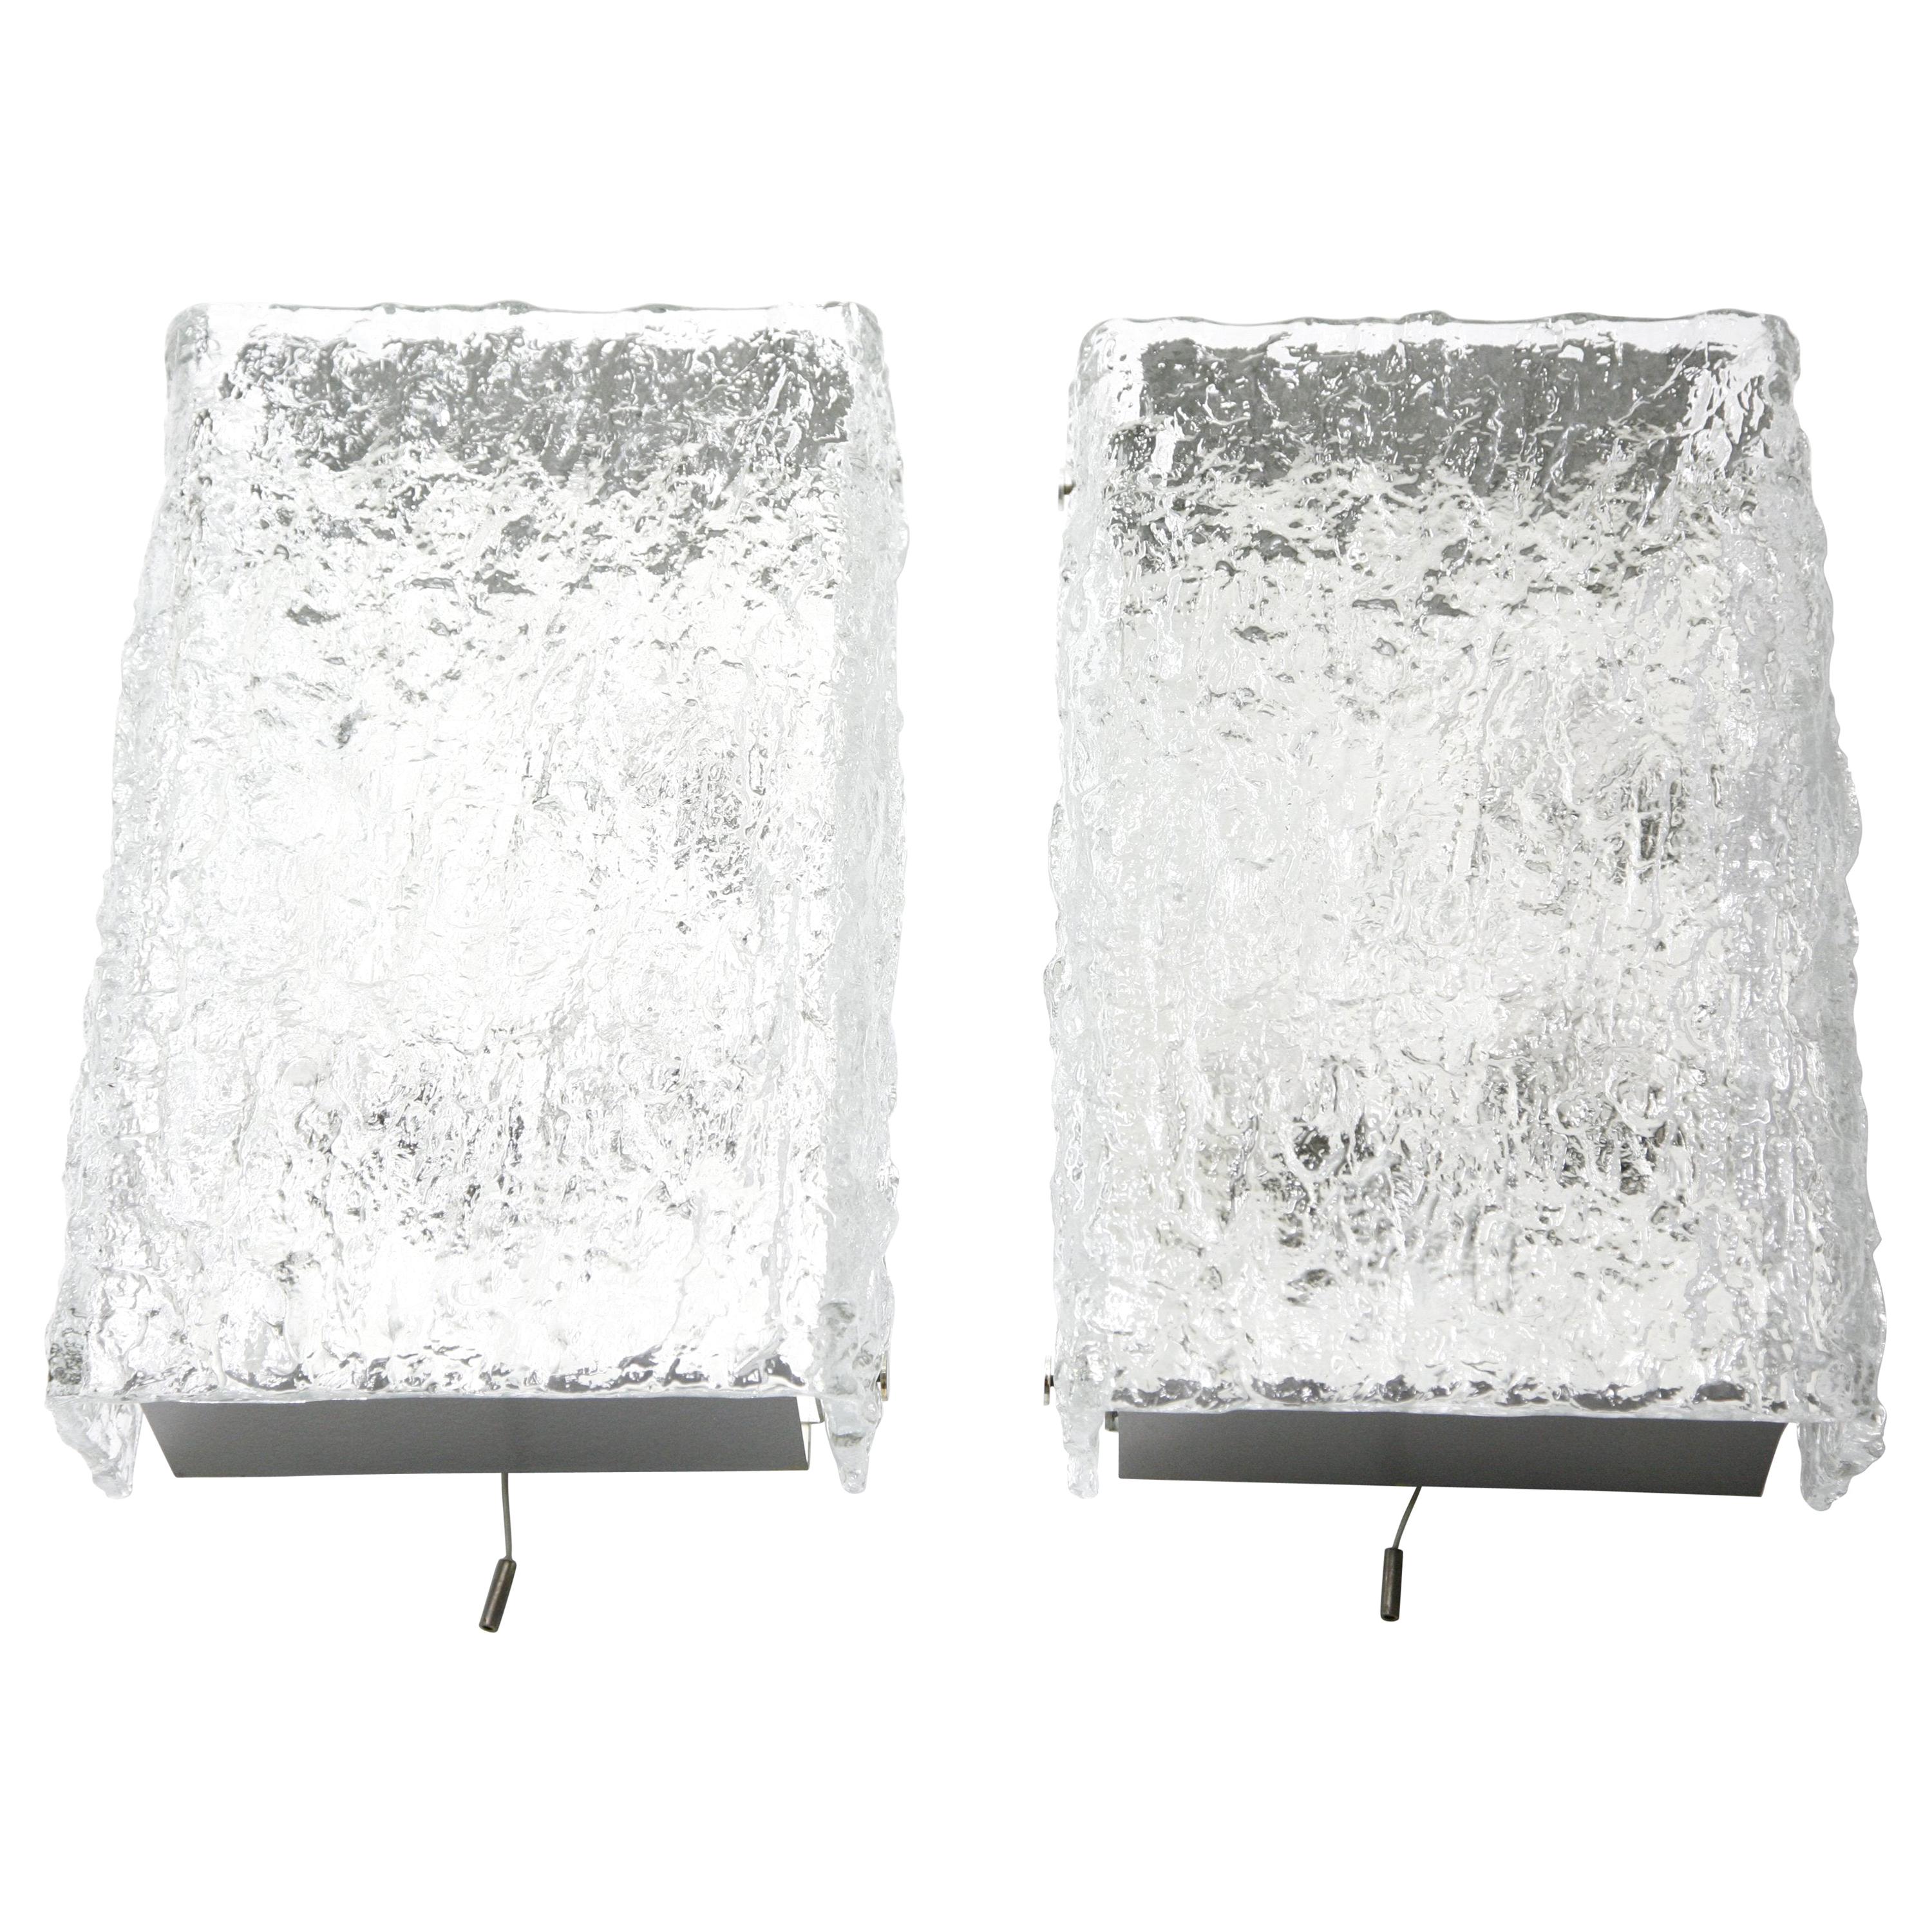 Pair of wall lights by Kalmar from the 1960s white enameled back plates, top and bottom plates are matte nickel, one piece of thick ice looking bend crystal with a wavy structure to the outer glass surface glass shade with four chrome fittings holds